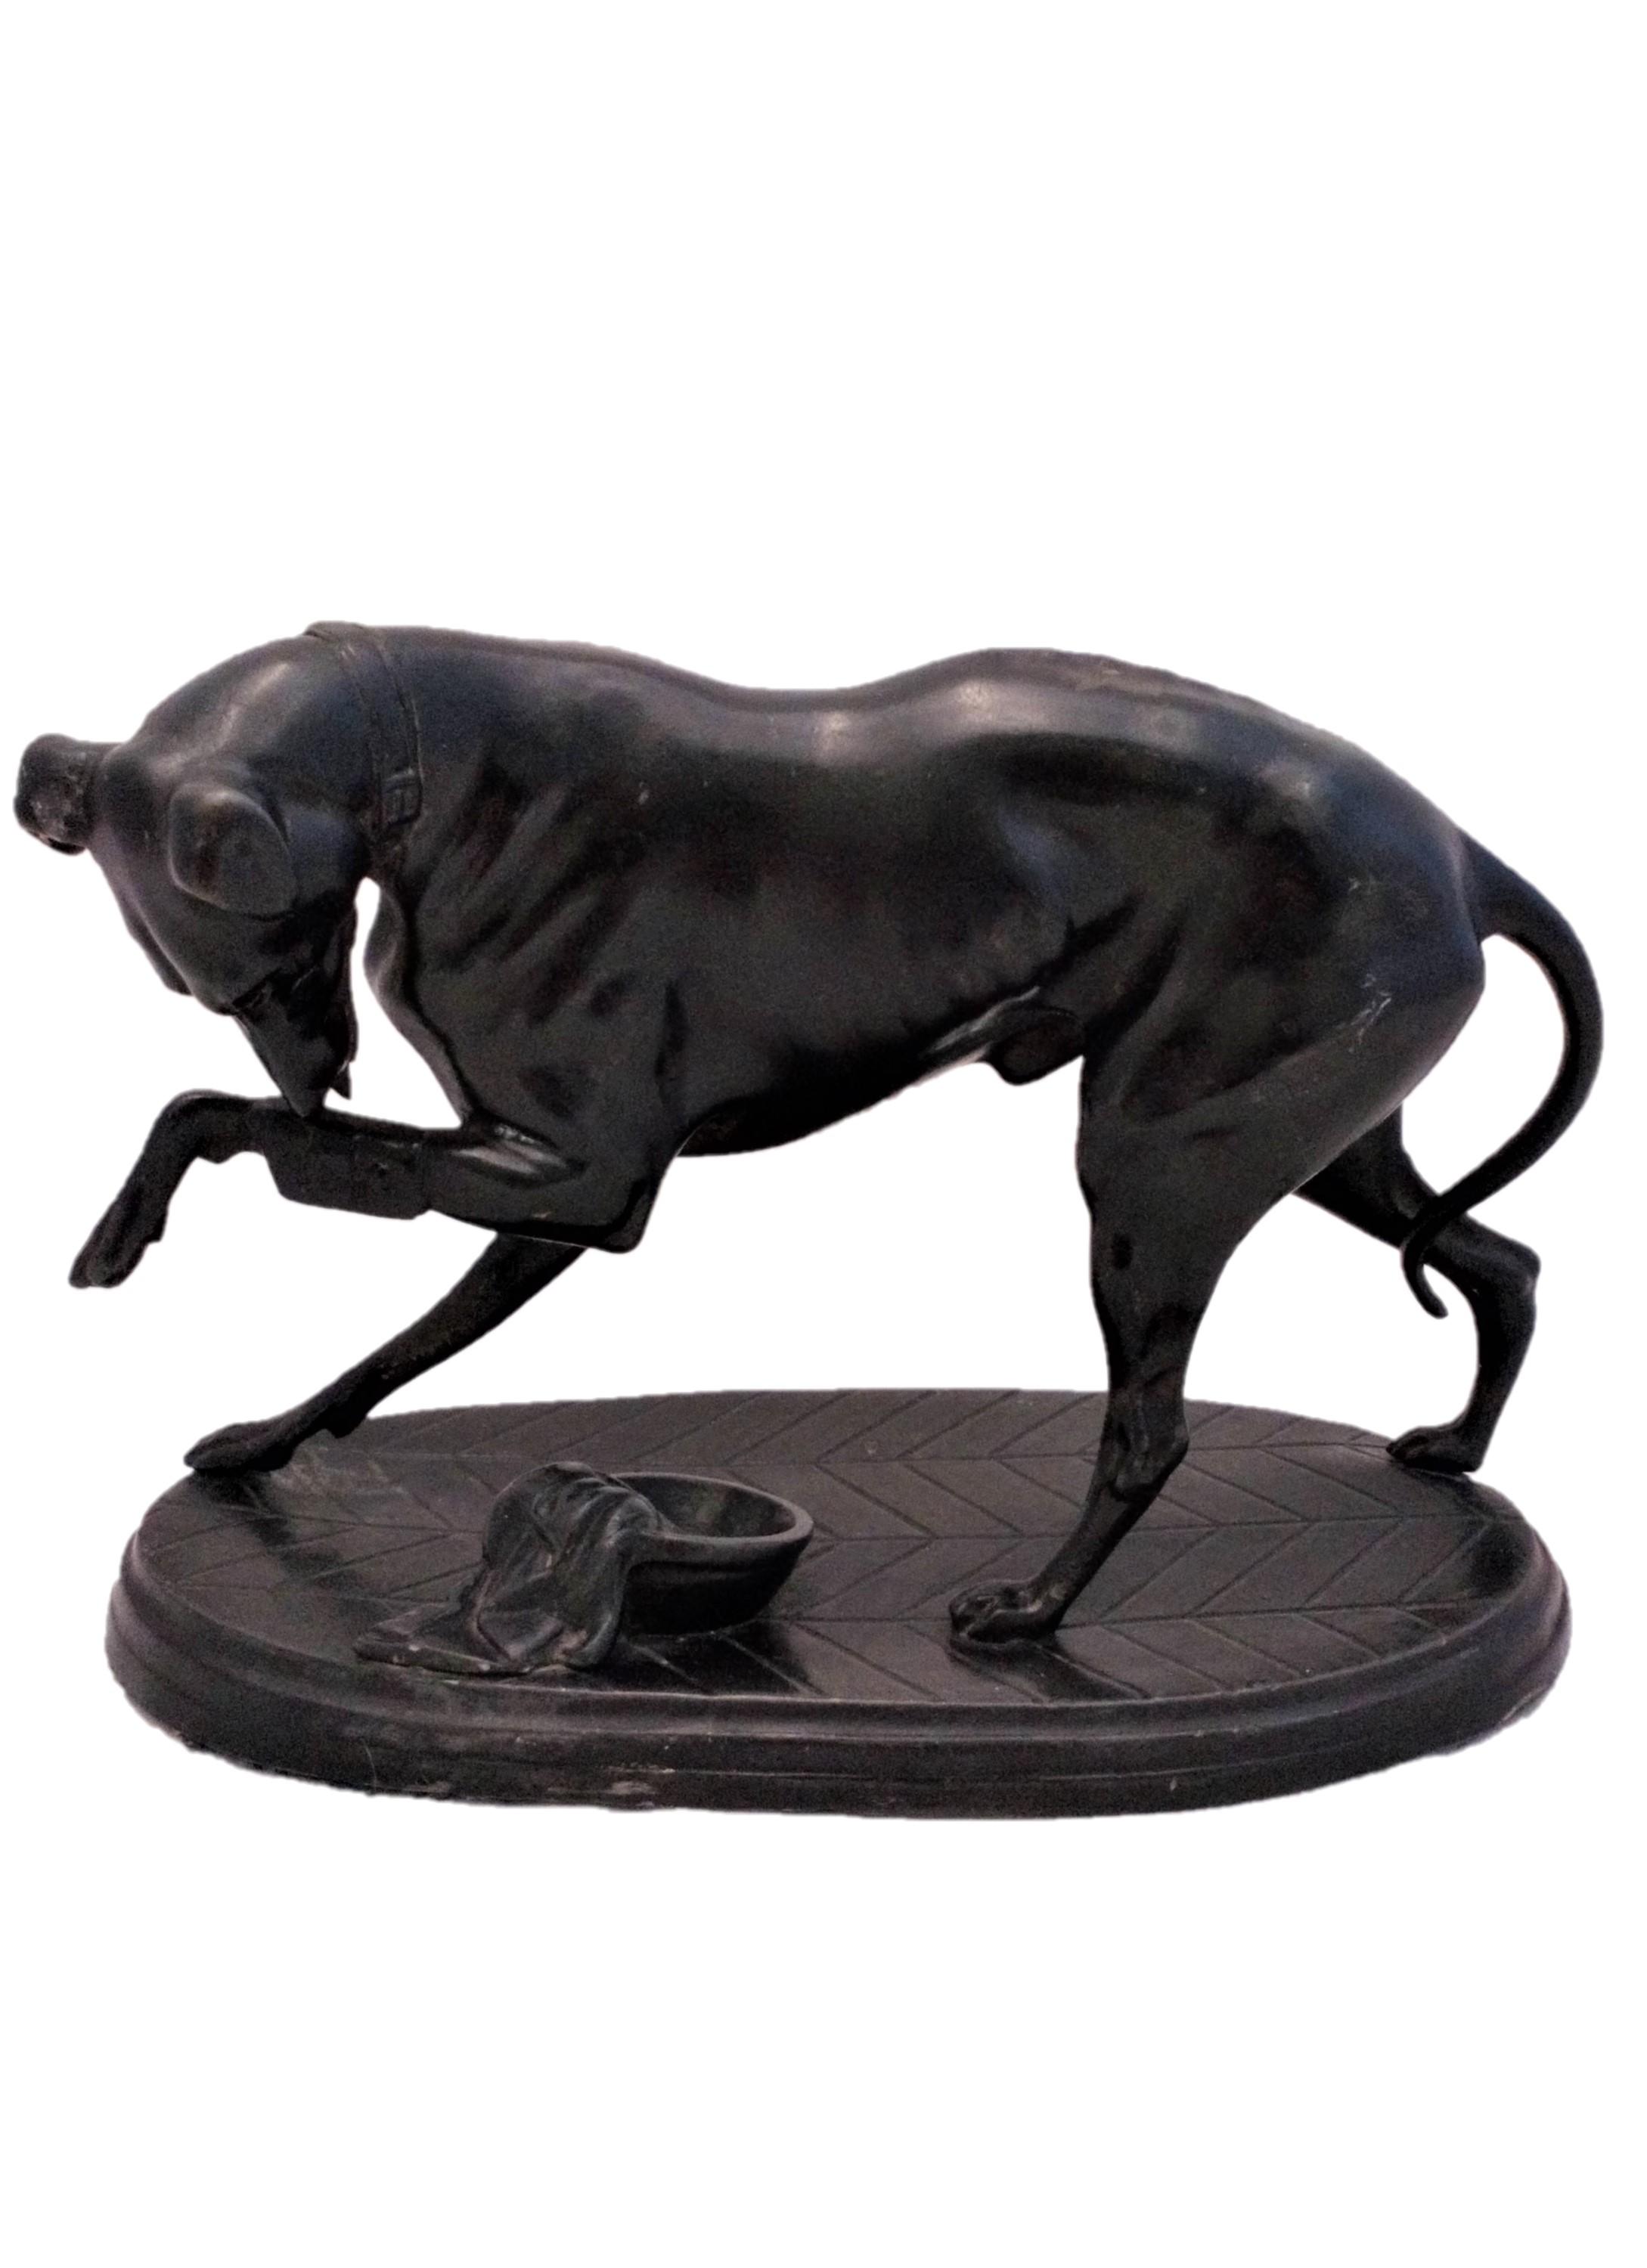 Antique Greyhound Figurine With Leg Splint Patinated Spelter after the Danish Animalier Adelgunde Vogt circa 1895